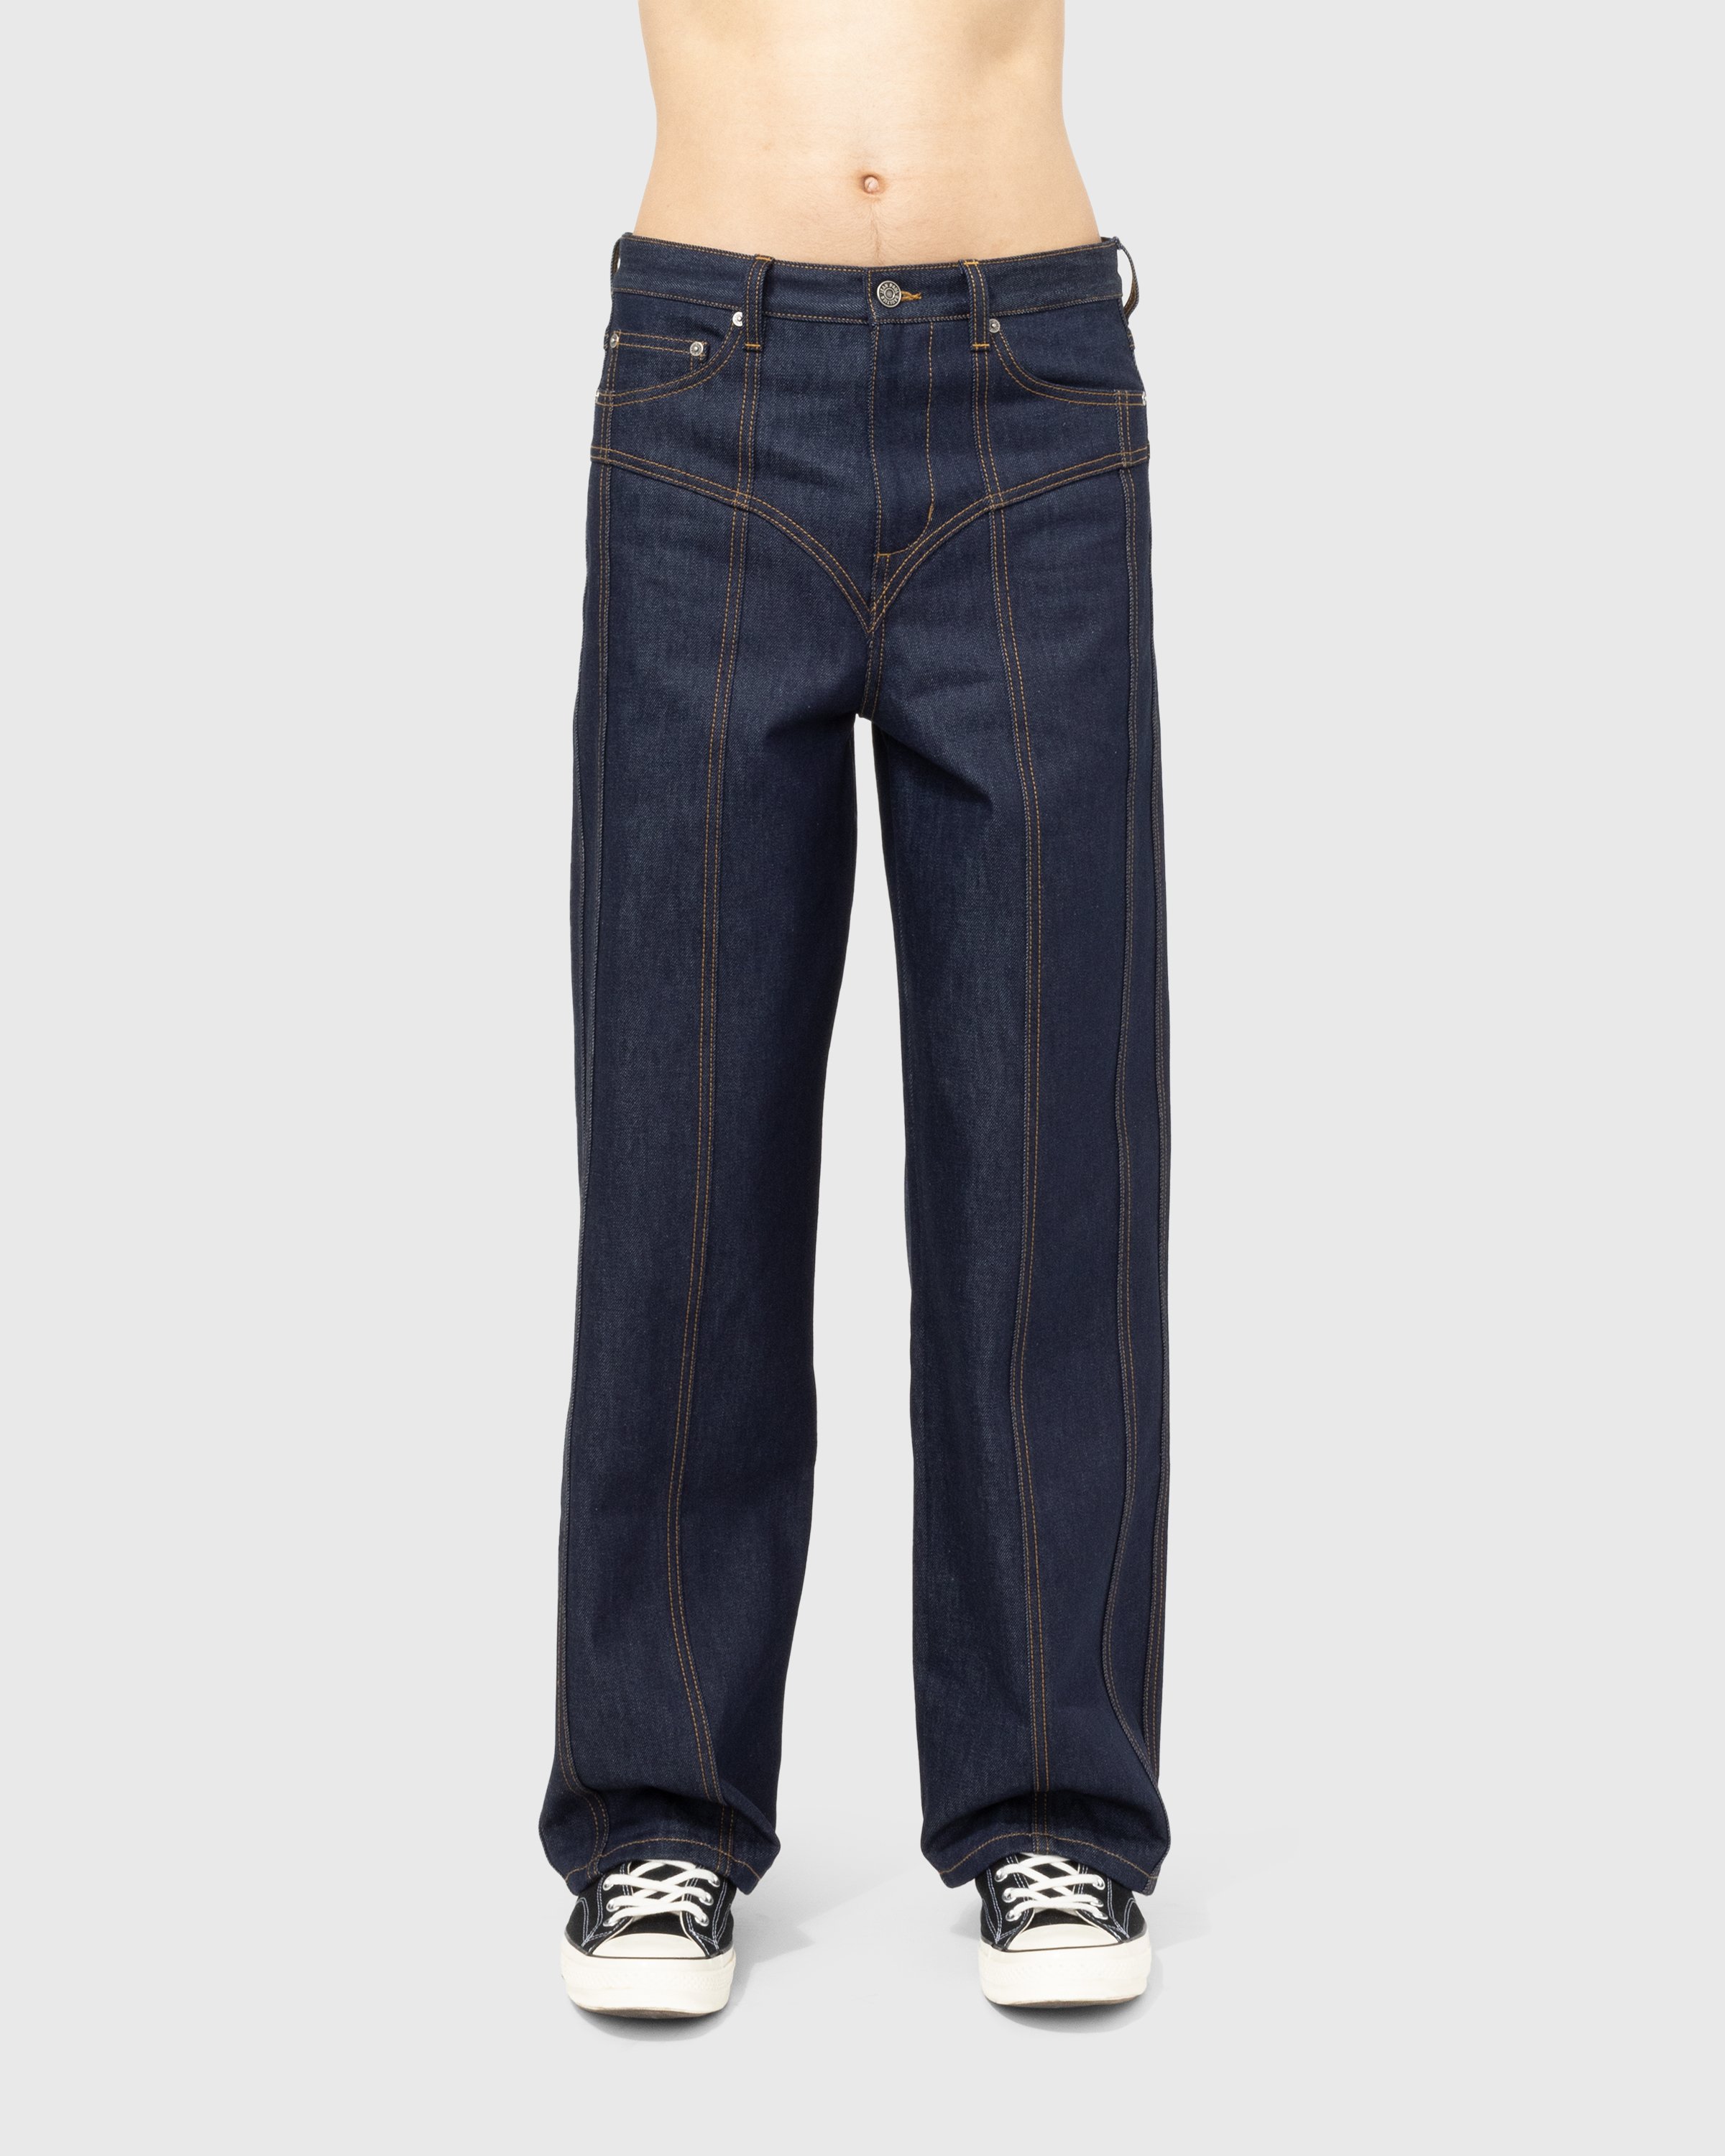 Jean Paul Gaultier - Raw Low-Rise Jeans Indigo - Clothing - Blue - Image 3